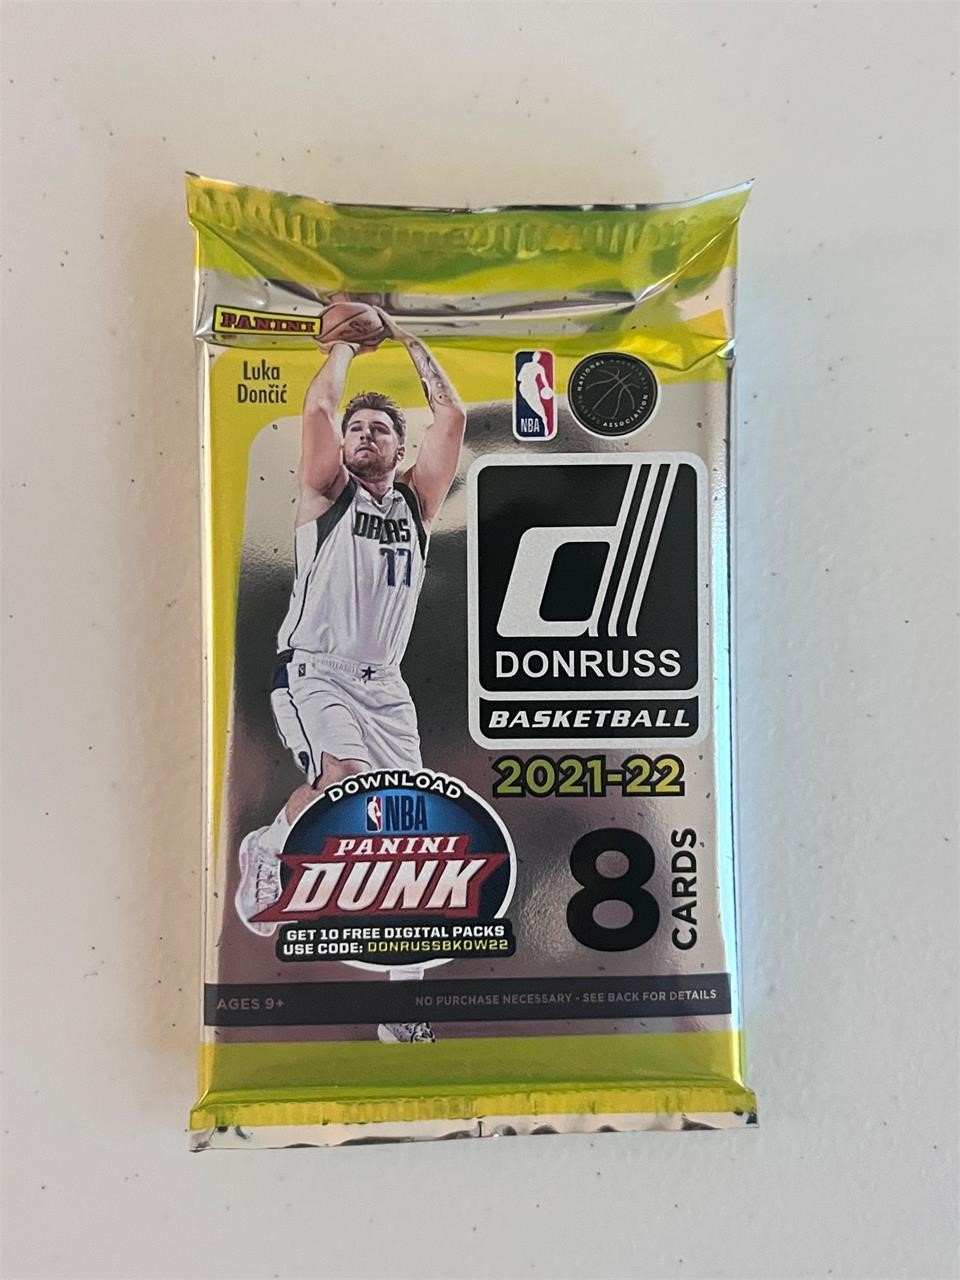 2021-22 Donruss Unopened Pack of 8 cards